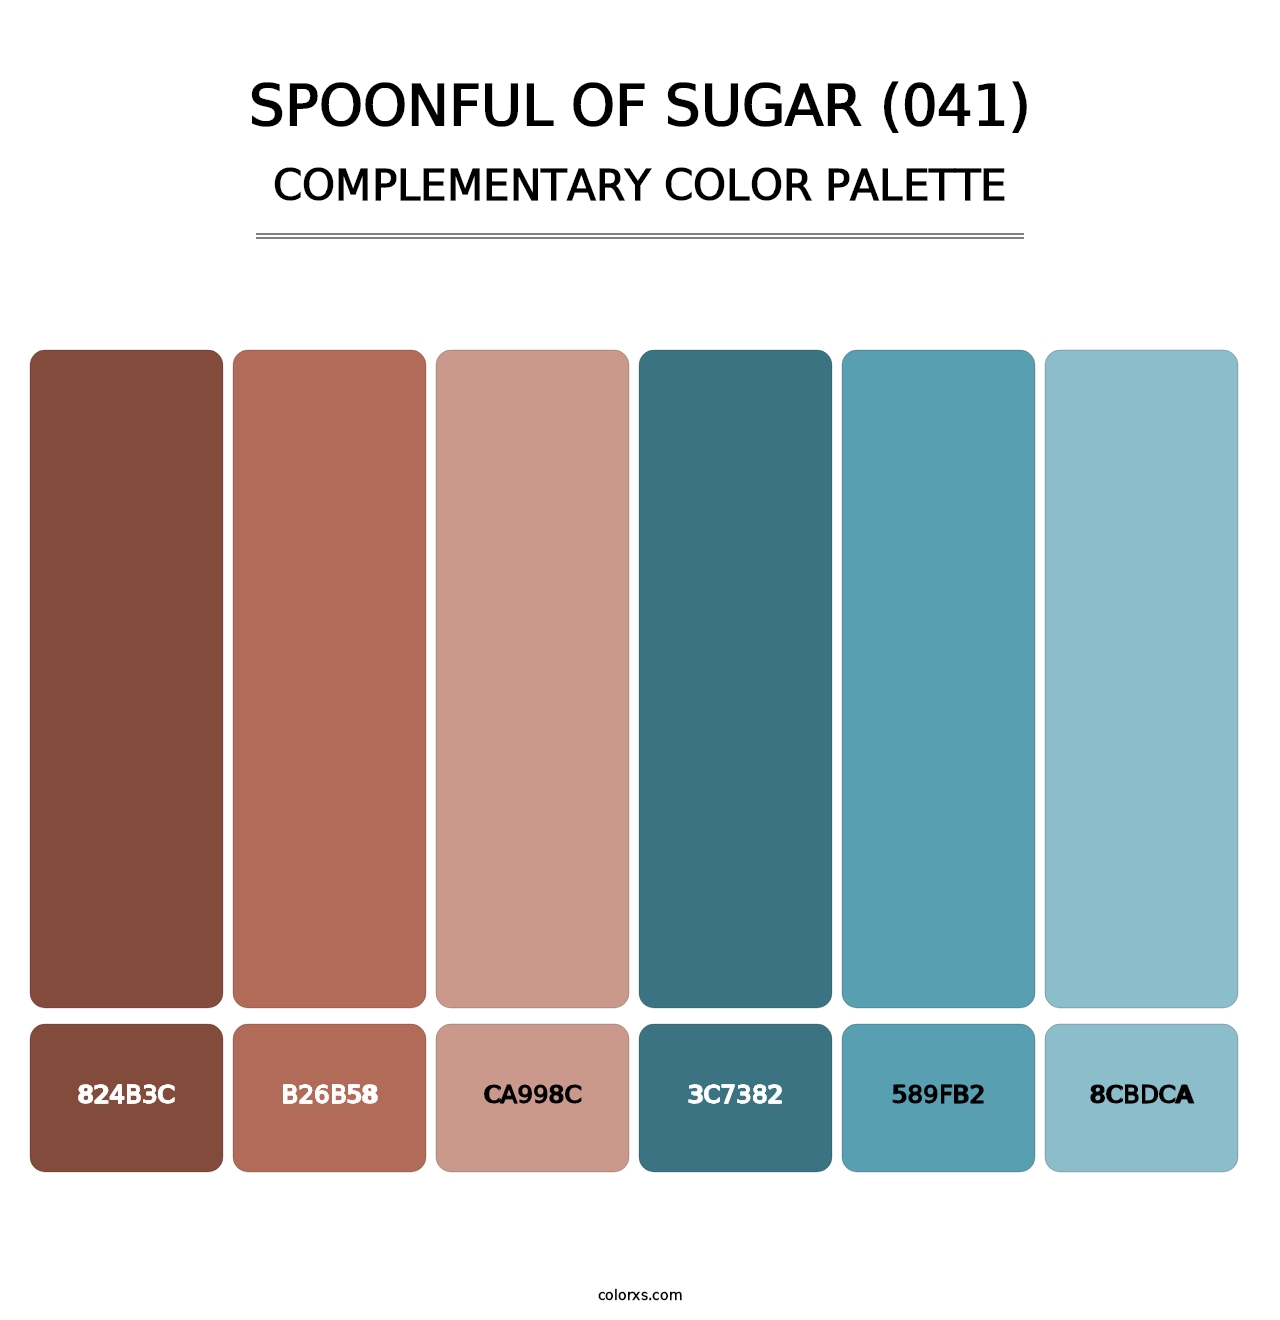 Spoonful of Sugar (041) - Complementary Color Palette